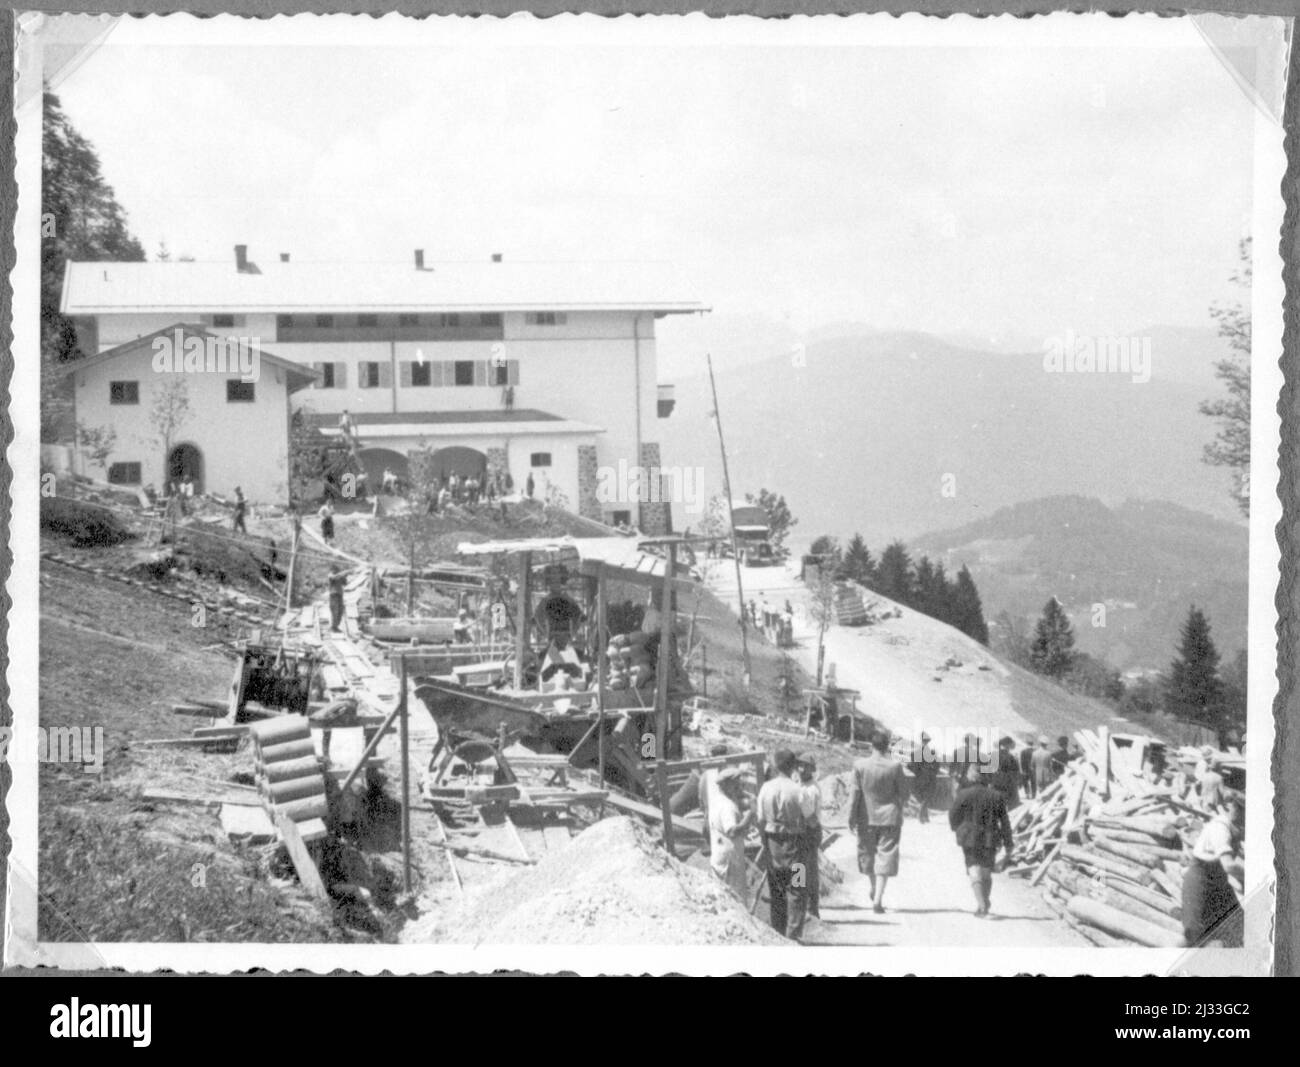 Der Neue 'Berghof' 1936. Eva Braun's Photo Albums, ca. 1913 - ca. 1944. These albums are attributed to Eva Braun (four are claimed by her friend Herta Schneider, nee Ostermeyer) and document her life from ca. 1913 to 1944. There are many photographs of Eva, her sisters and their children, Herta Schneider and her children, as well as photographs of Eva's vacations, family members and friends. Included also are photographs taken by and of Eva Braun at Hitler's chalet Berghof (or Kehlstein), photographs of Hitler and his entourage, visitors to Berghof and the scenery around Berchtesgaden, and som Stock Photo